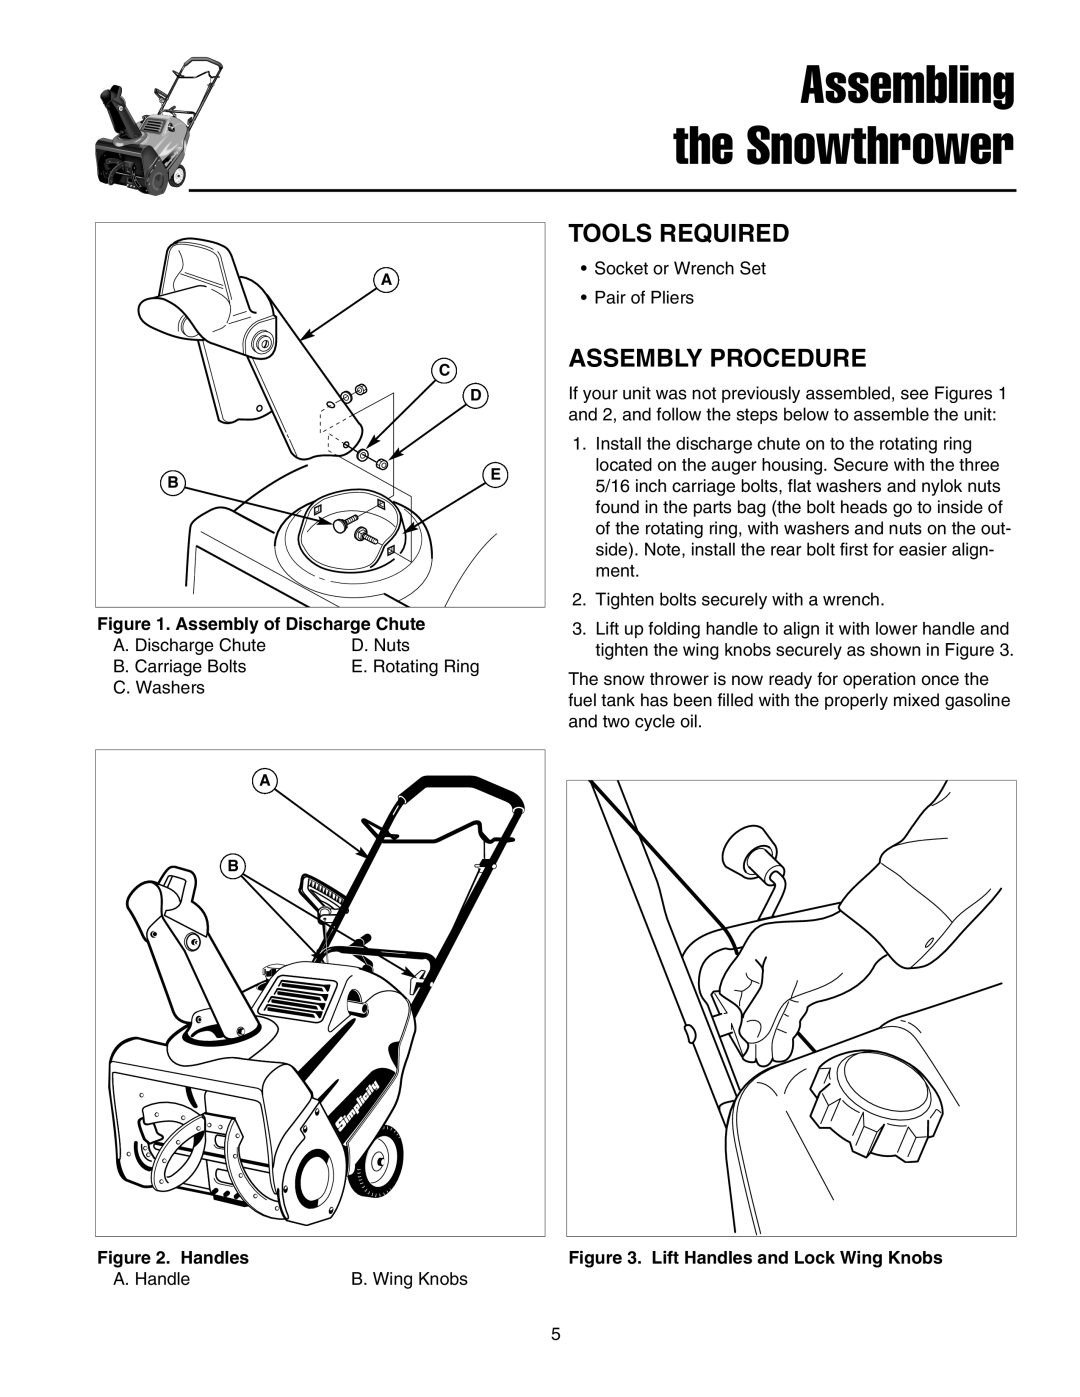 Simplicity 1692917 Tools Required, Assembly Procedure, Assembly of Discharge Chute, Handles, Assembling the Snowthrower 